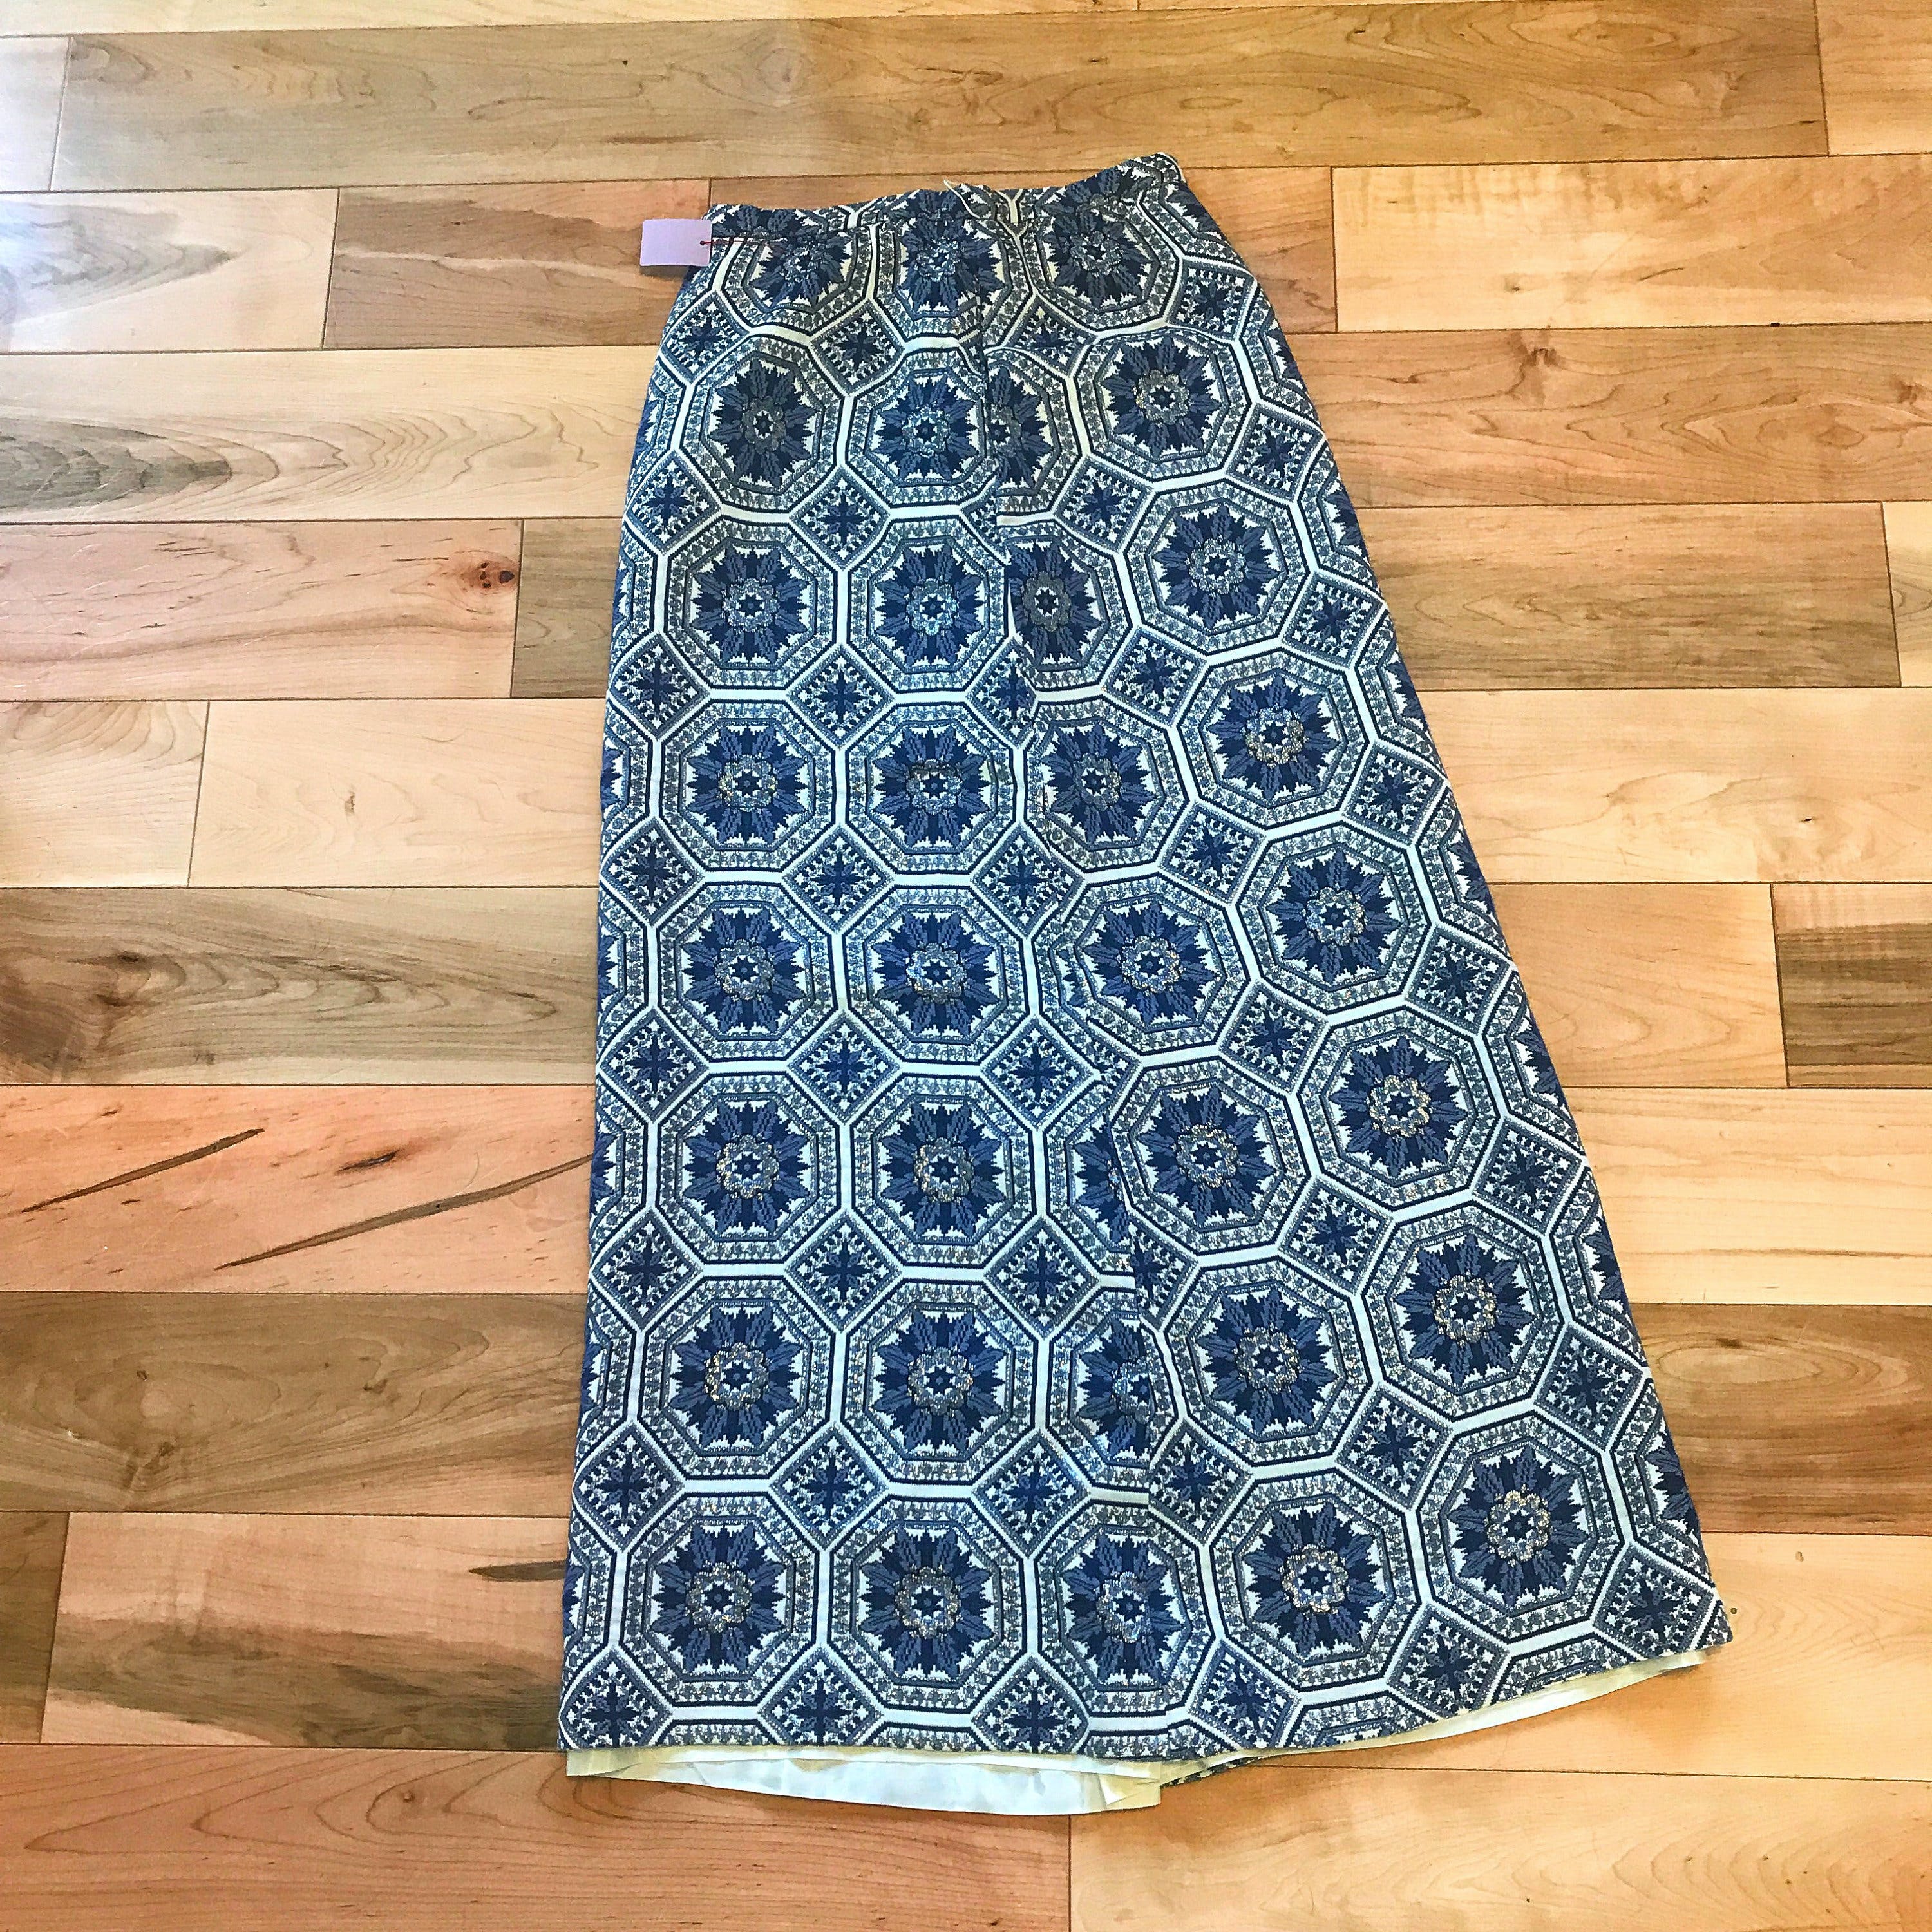 Vintage Blue and White Brocade Maxi Skirt by Nelly de Grab | Shop THRILLING